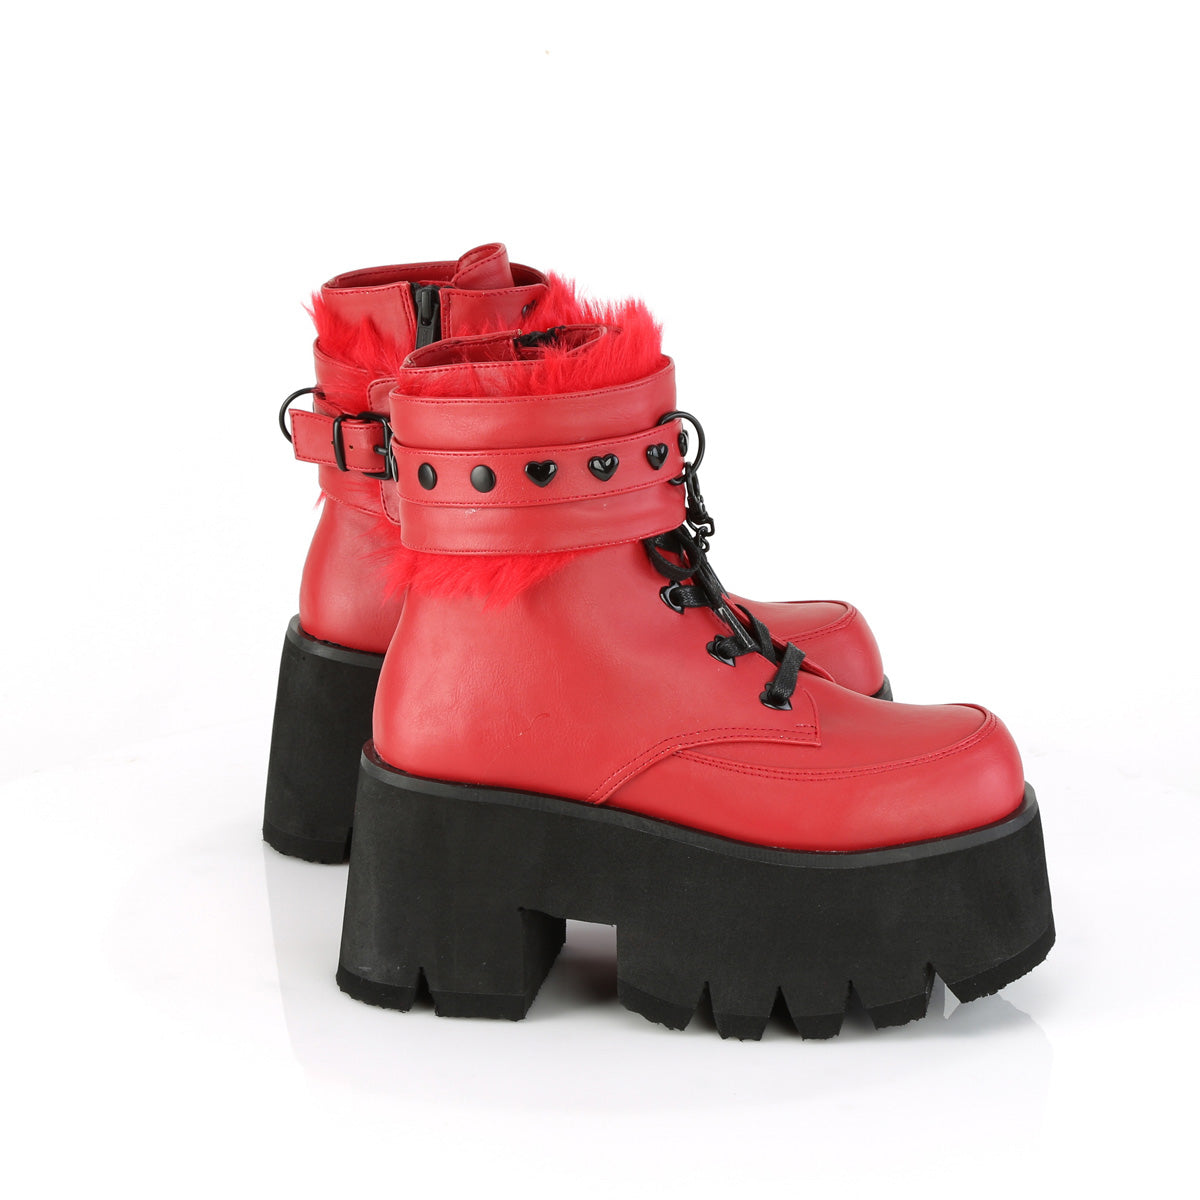 ASHES-57 Demoniacult Alternative Footwear Women's Red Chunky Platform Ankle Boots